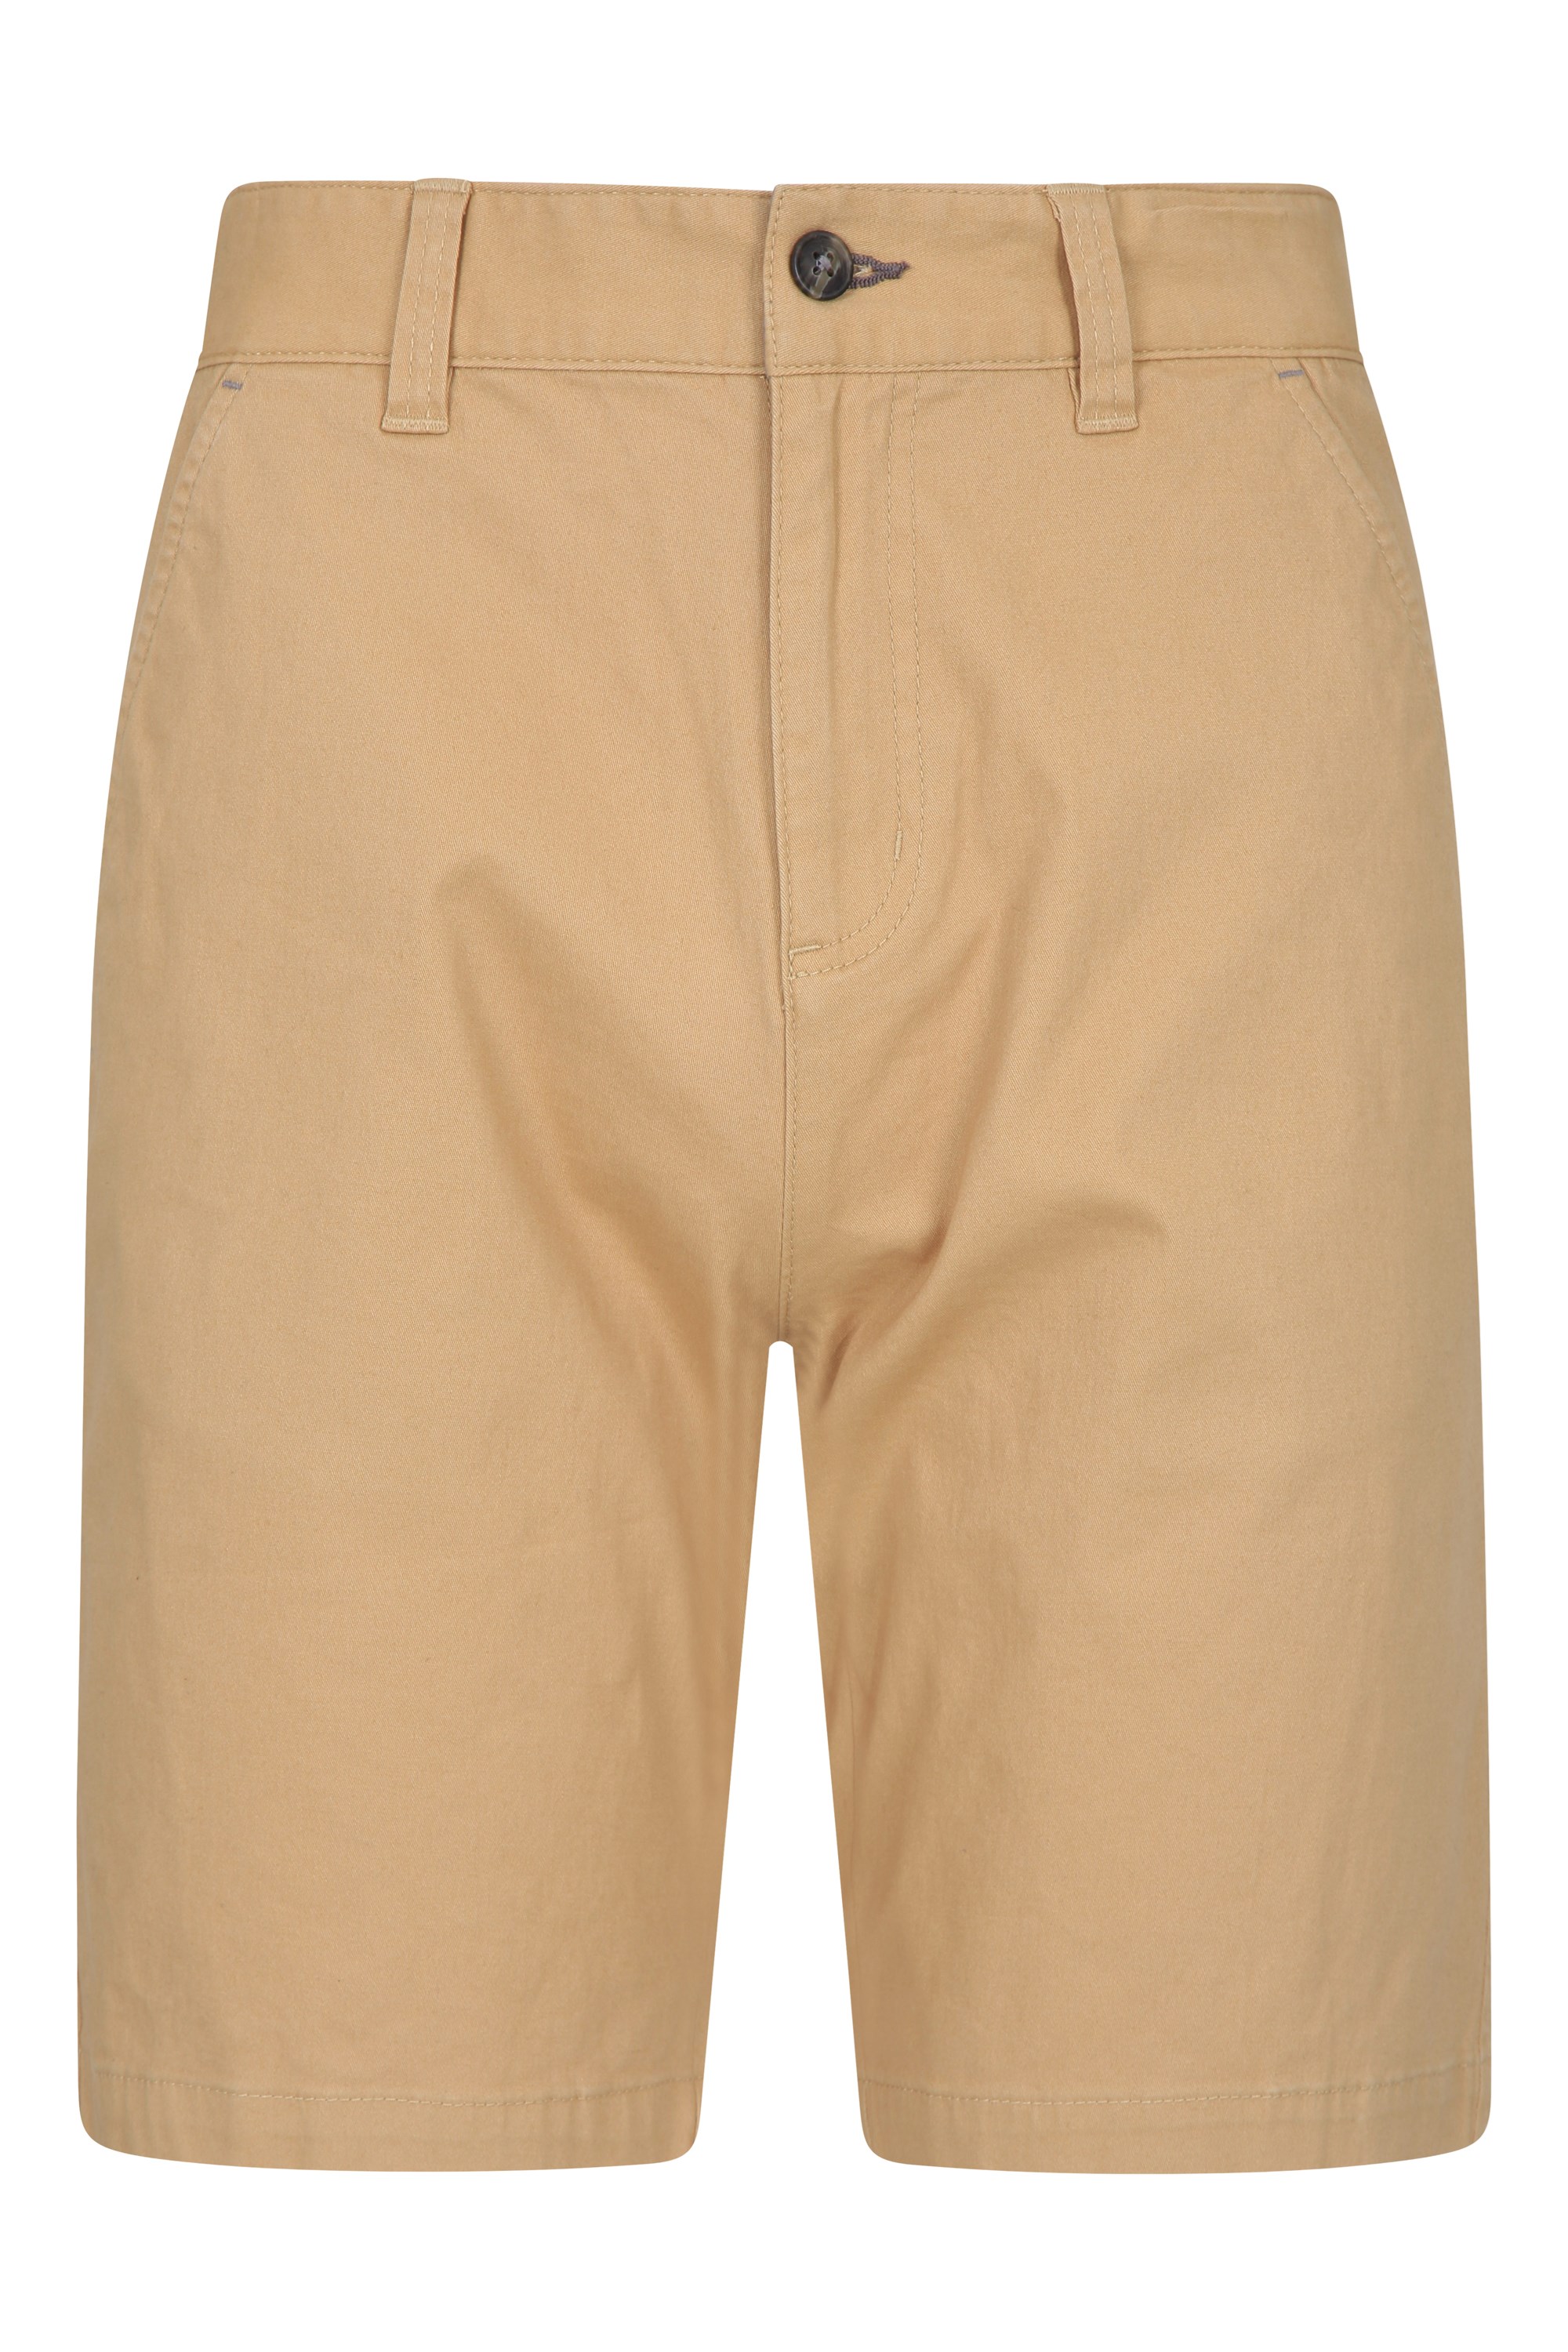 Short chino Organic Woods pour homme - Beige